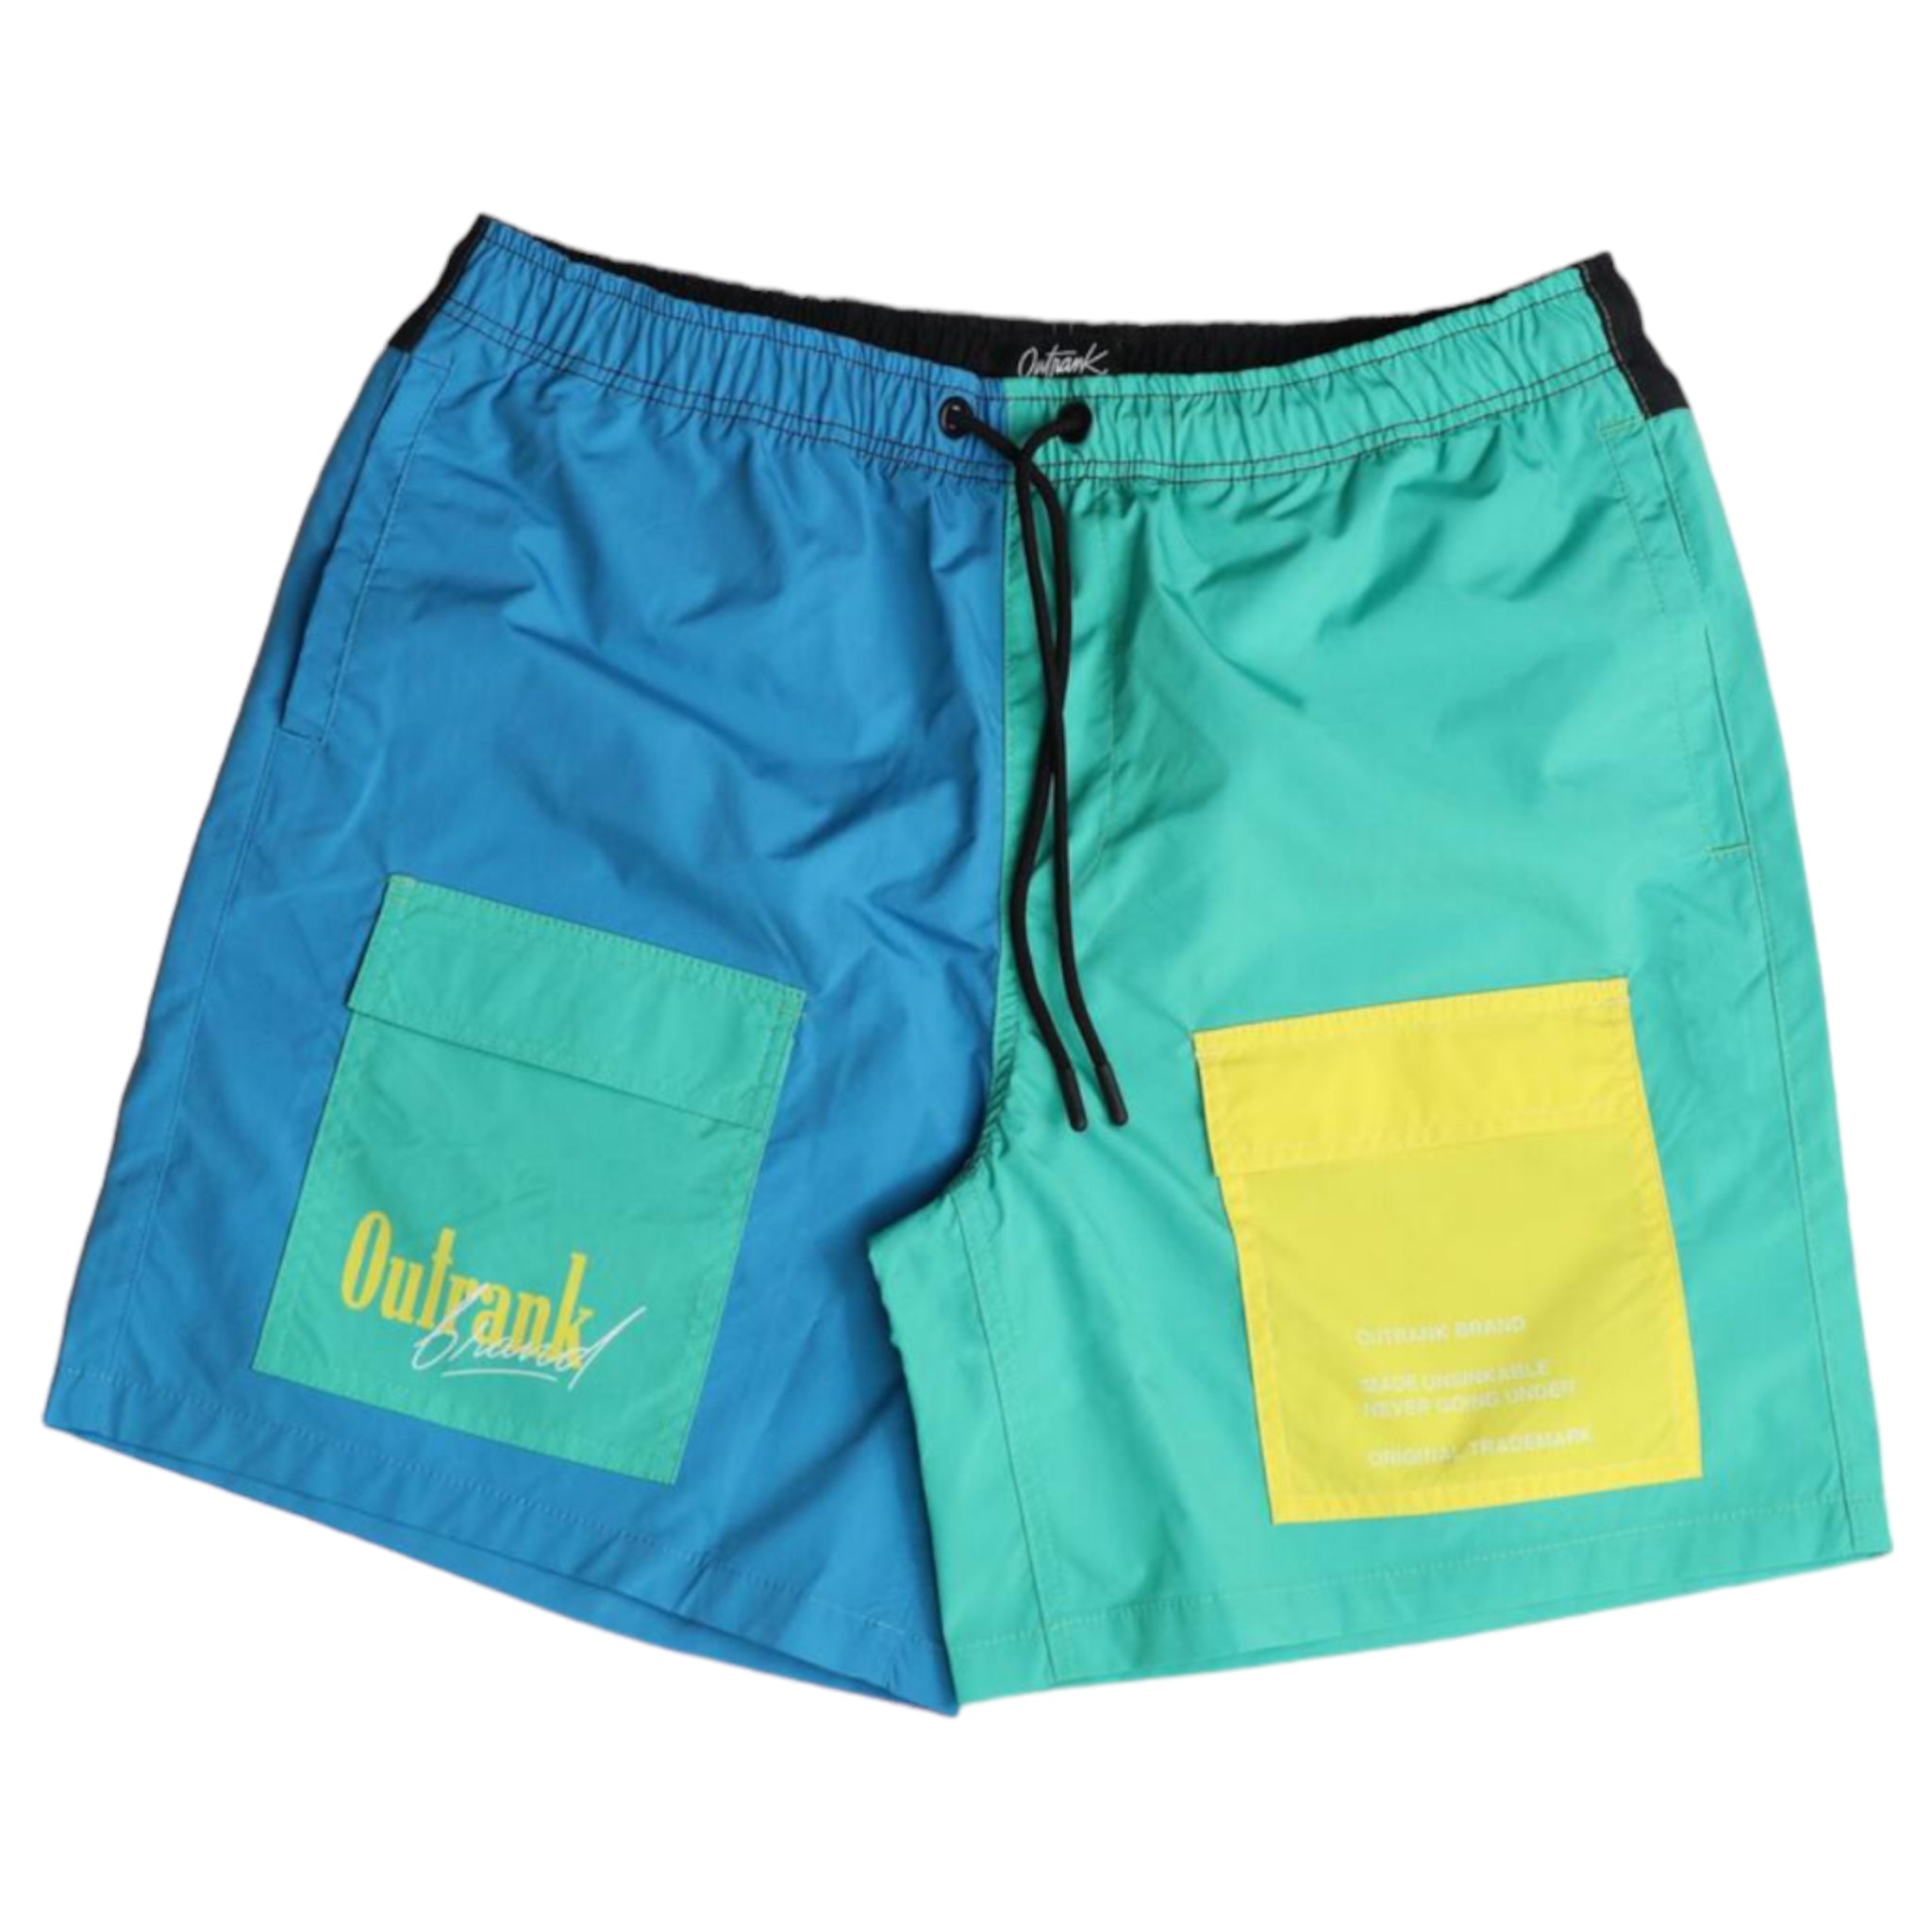 Outrank "Unsinkable" Color Block Shorts Yellow Green ss